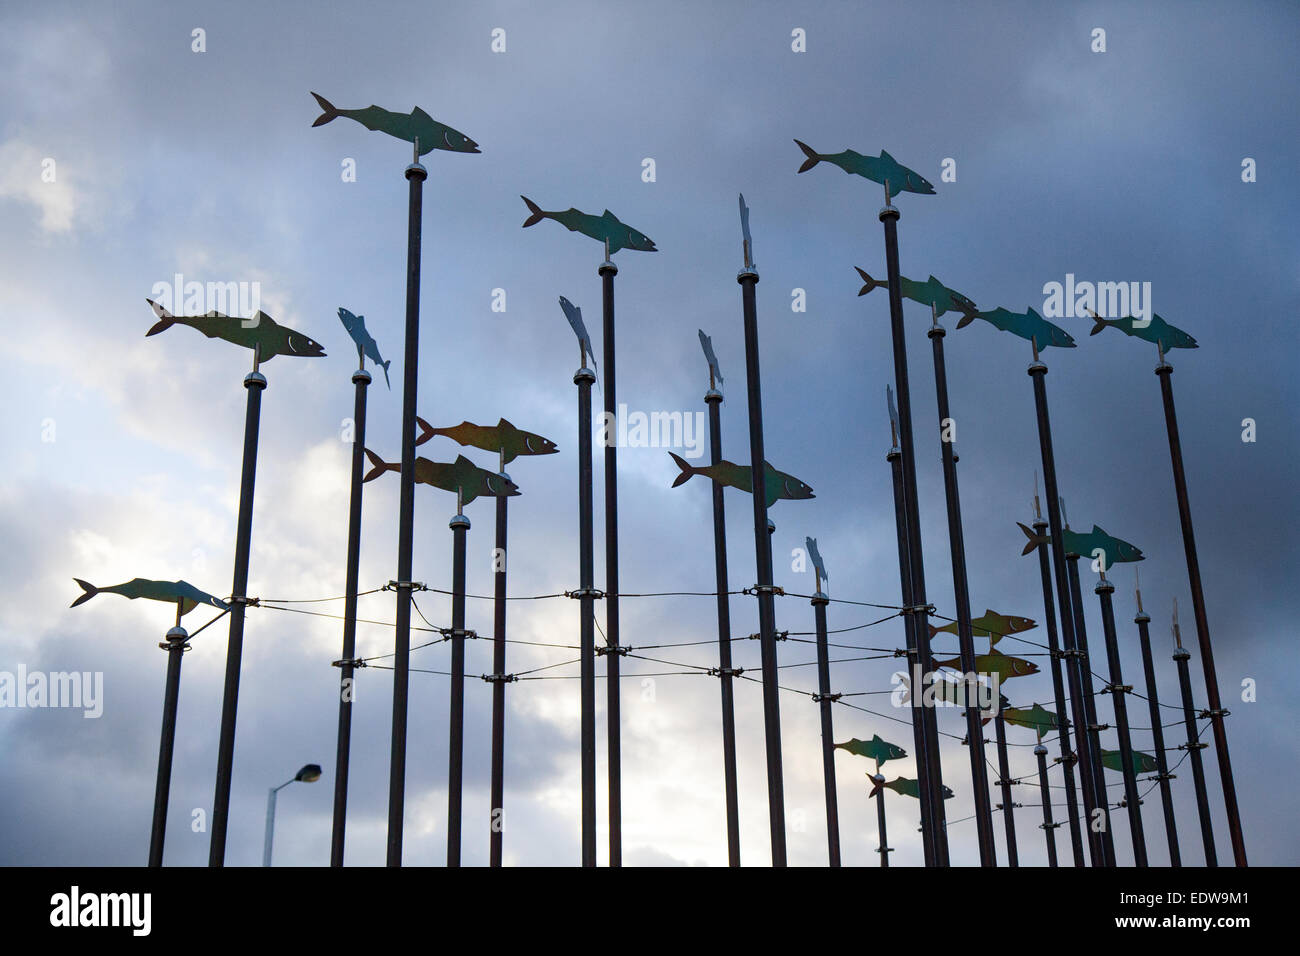 Southport, Merseyside, UK 10th January, 2014.  UK Weather. Low angle view of fish shaped wind sculptures on tall poles, indicating wind direction. Gale force winds and hail on the north-west sefton coast this morning. Credit:  Mar Photographics/Alamy Live News Stock Photo